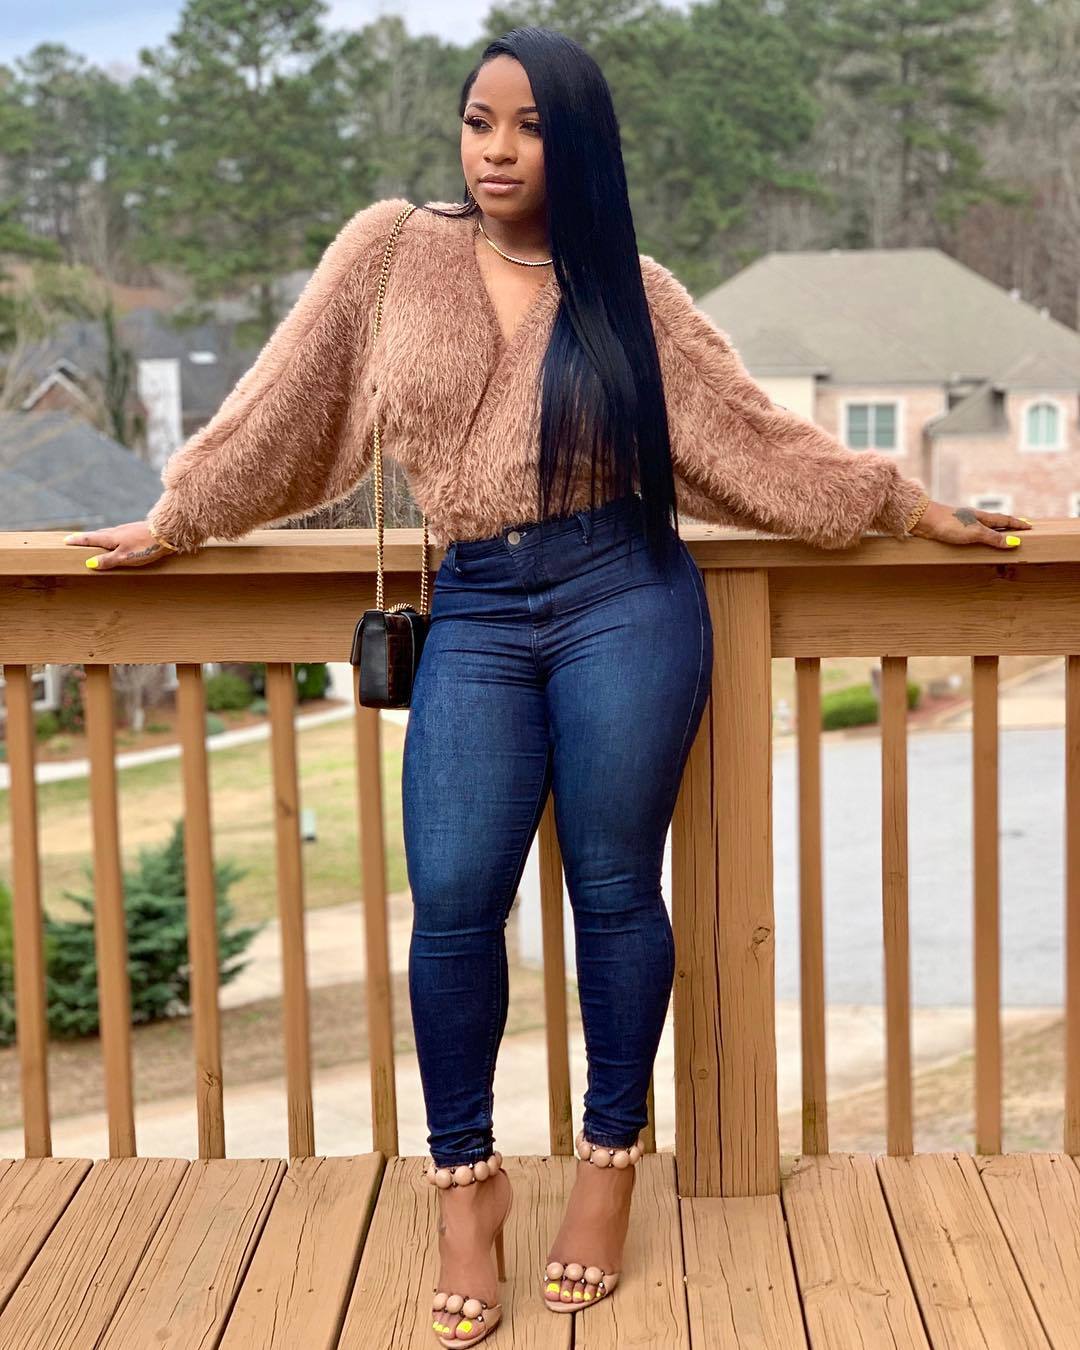 Toya Johnson Announces That Breonna Taylor’s Law Finally Passed ...